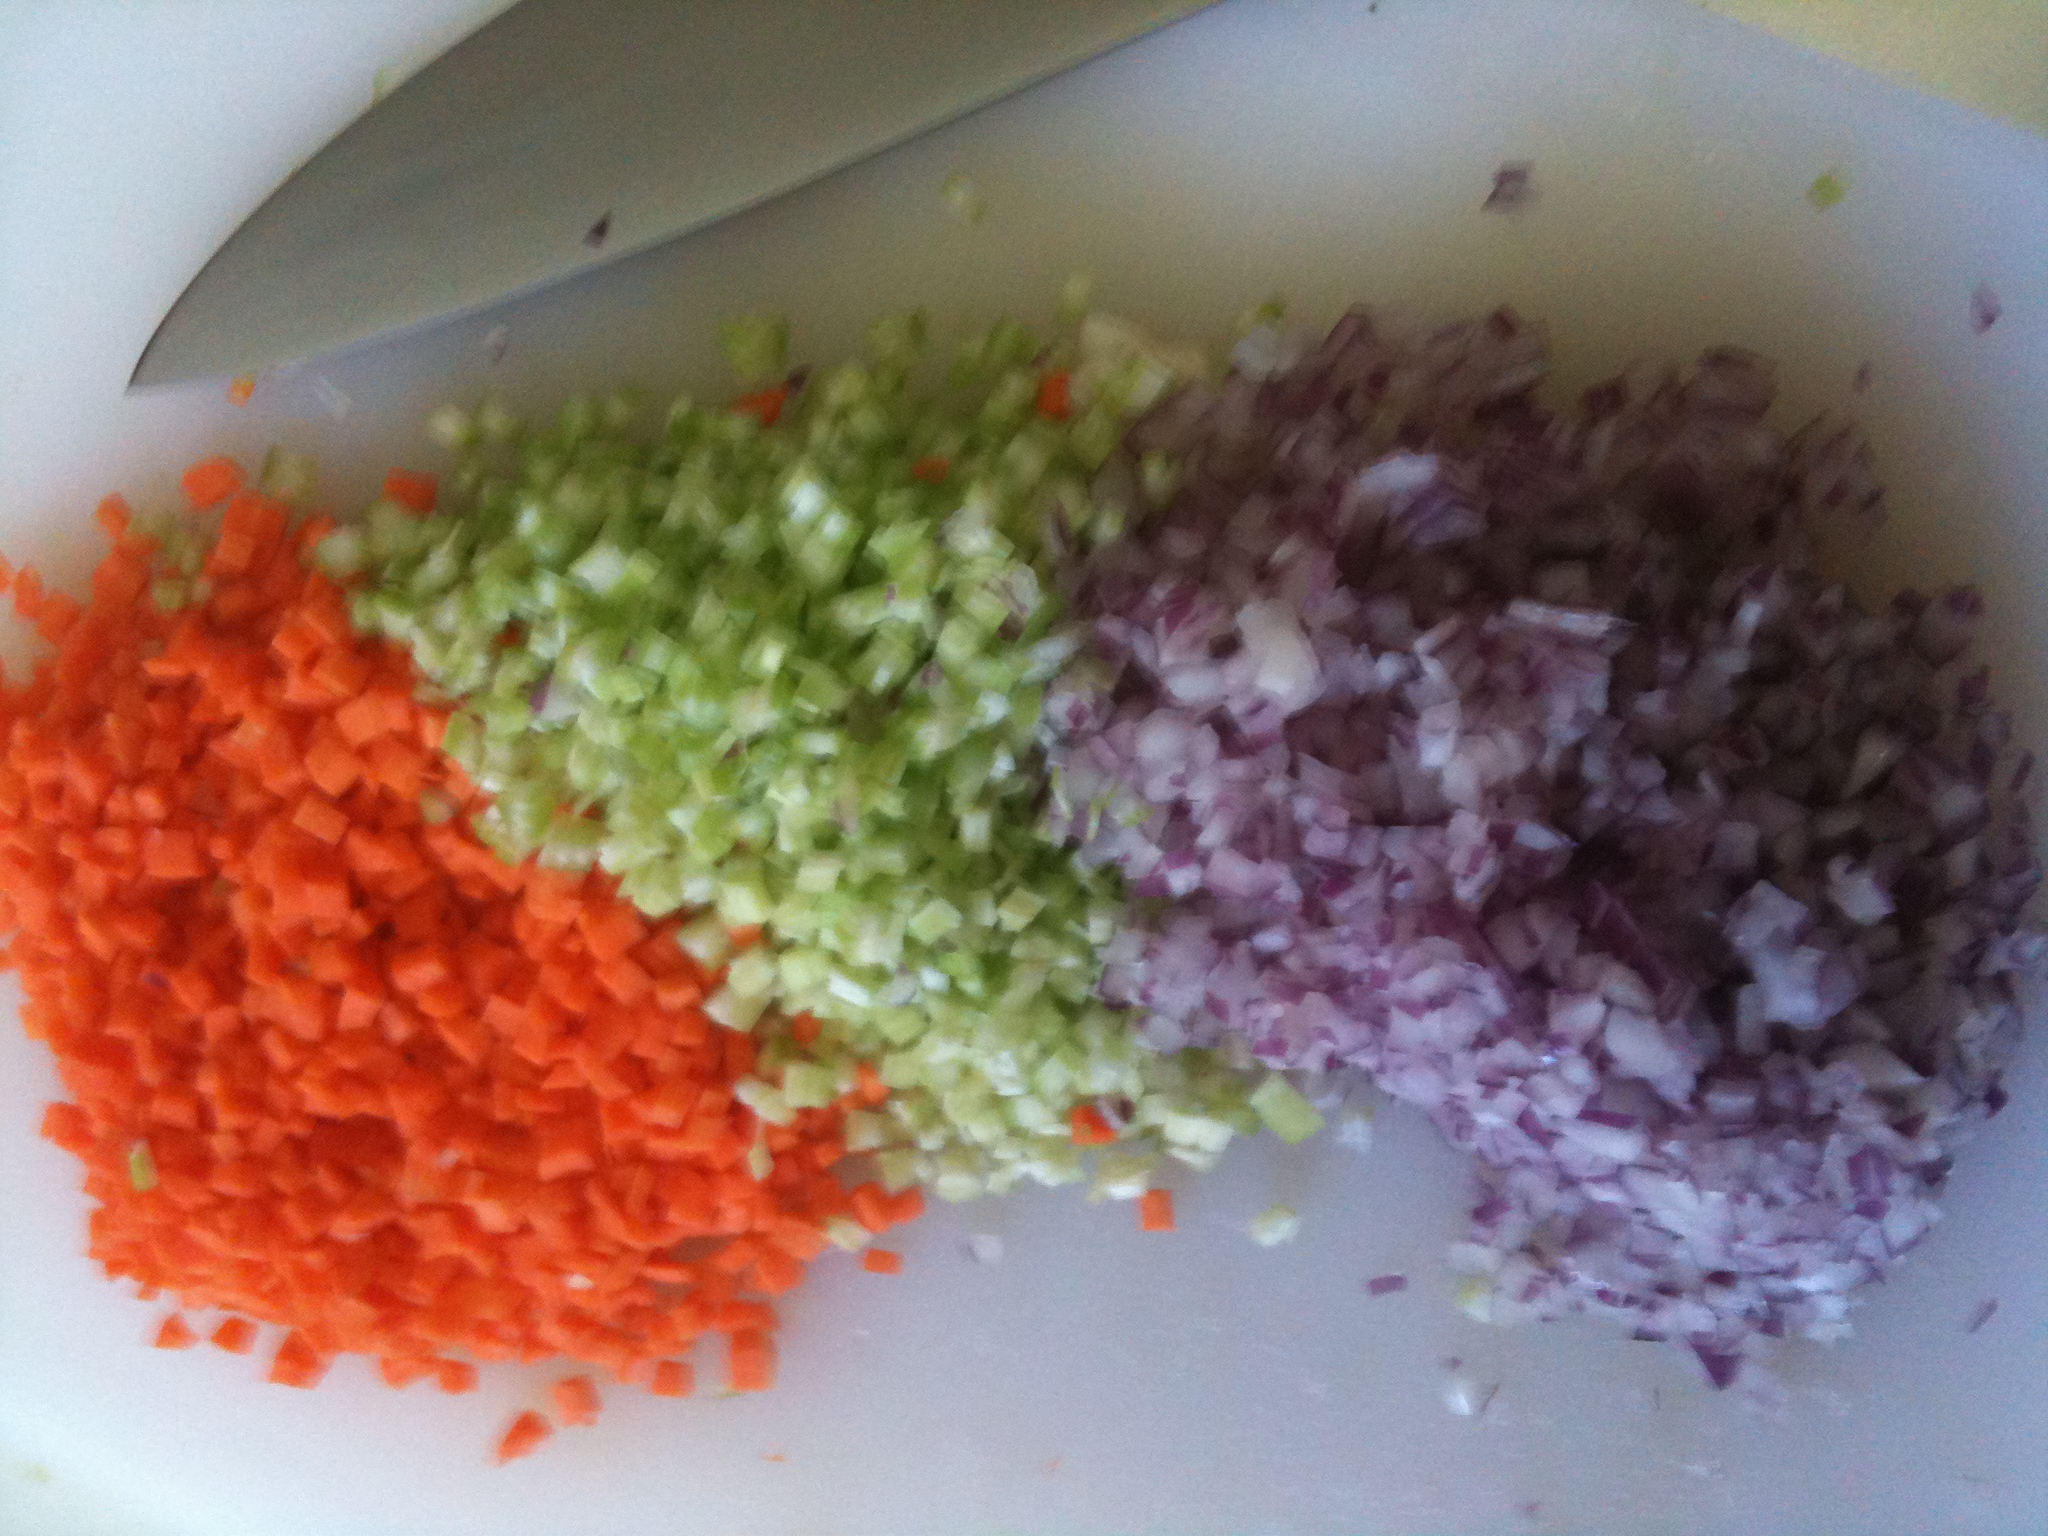 3mm brunoise of onions, celery and carrot